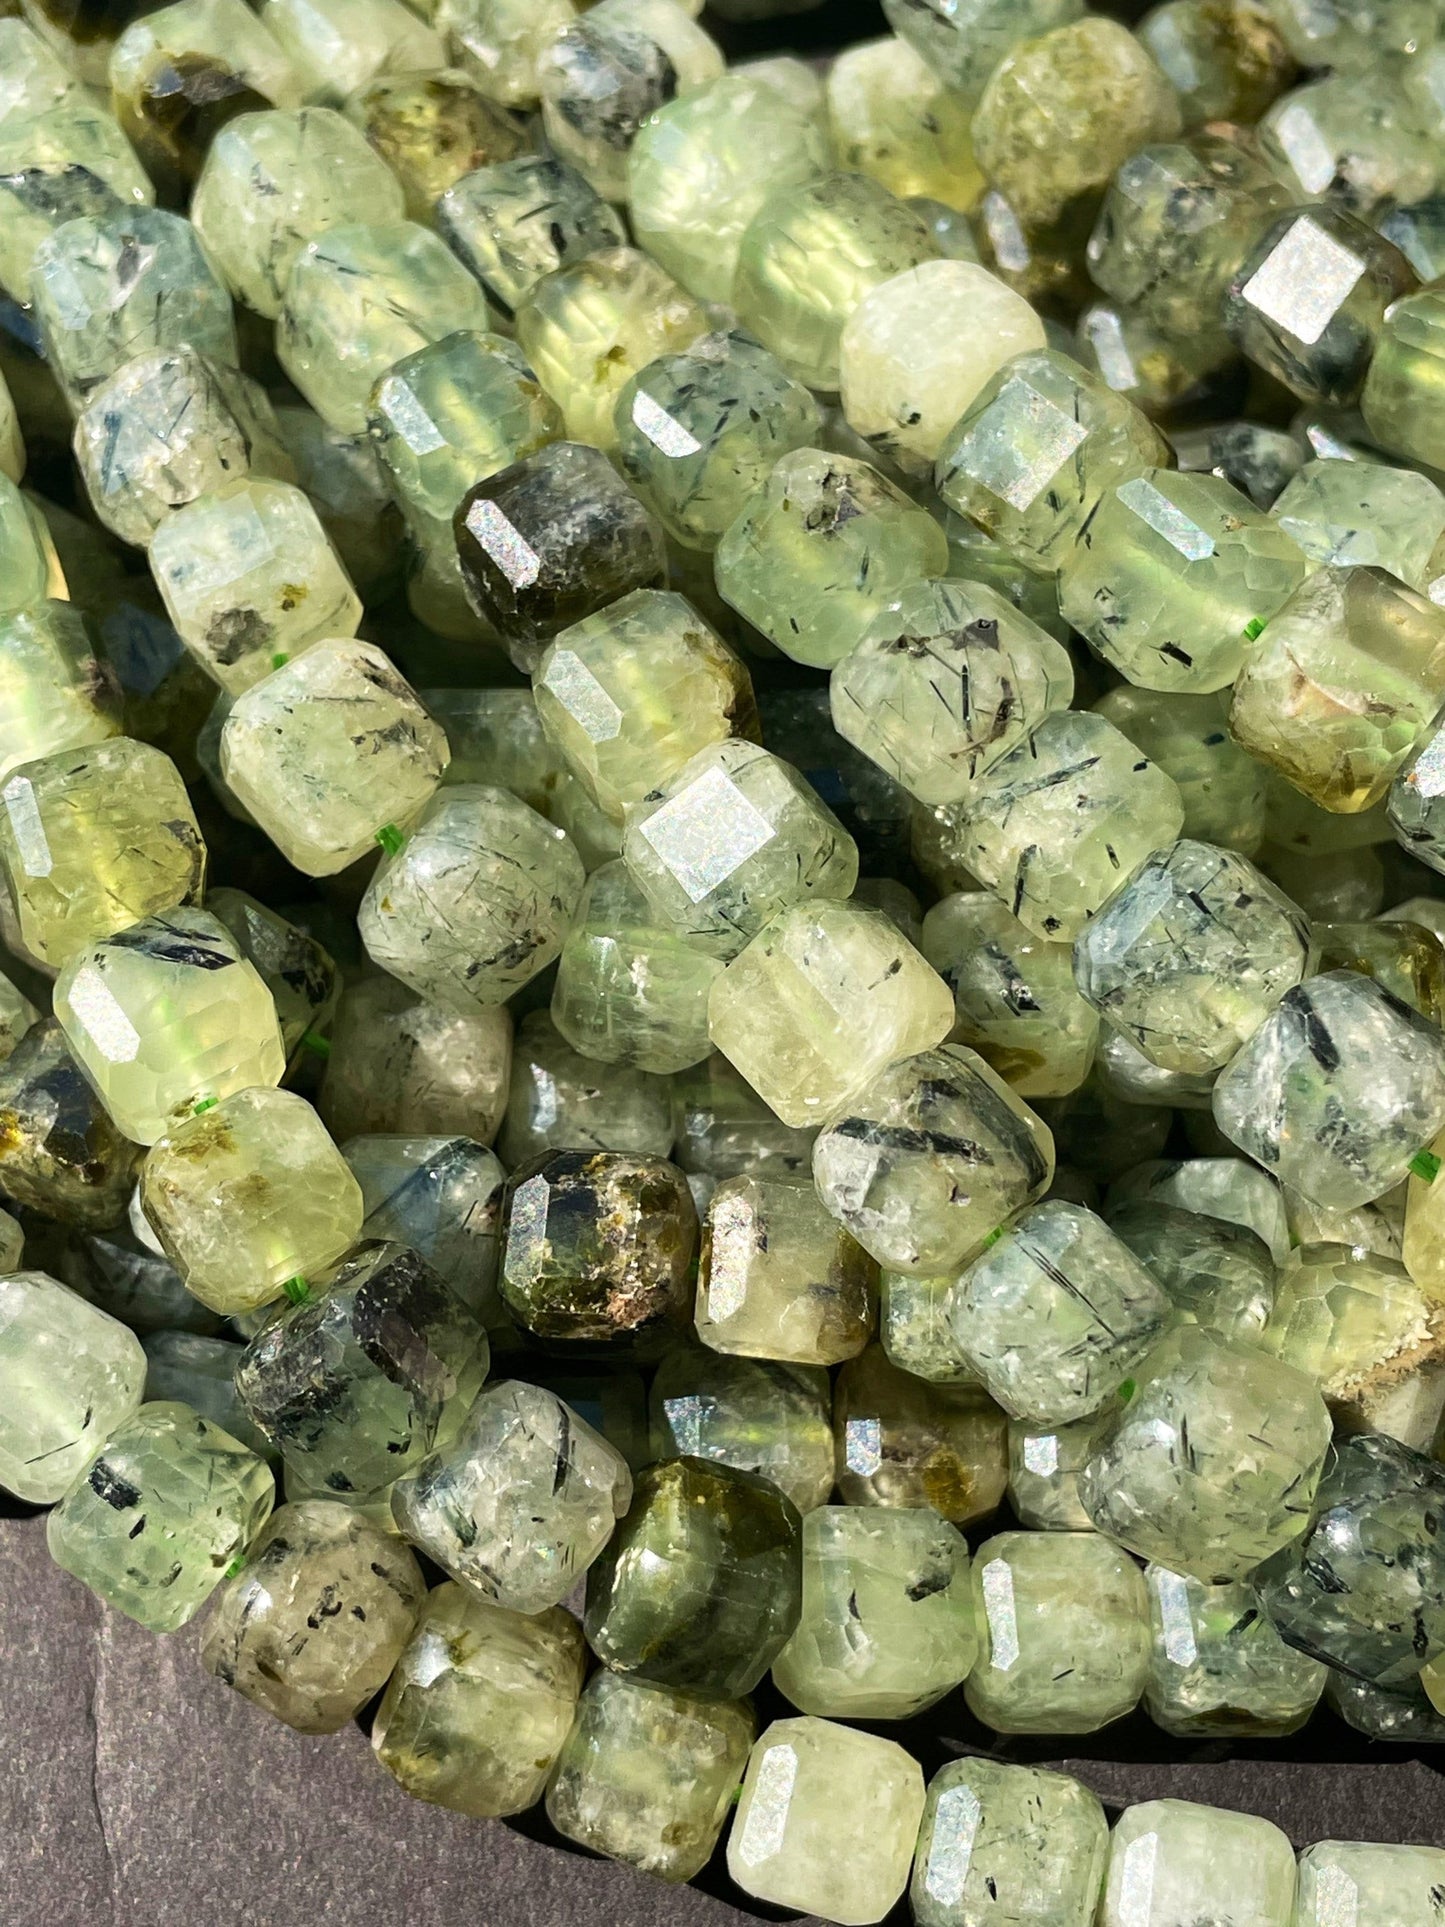 AAA Natural Green Prehnite Gemstone Bead Faceted 7mm Cube Shape, Beautiful Natural Green Color Prehnite Gemstone Bead